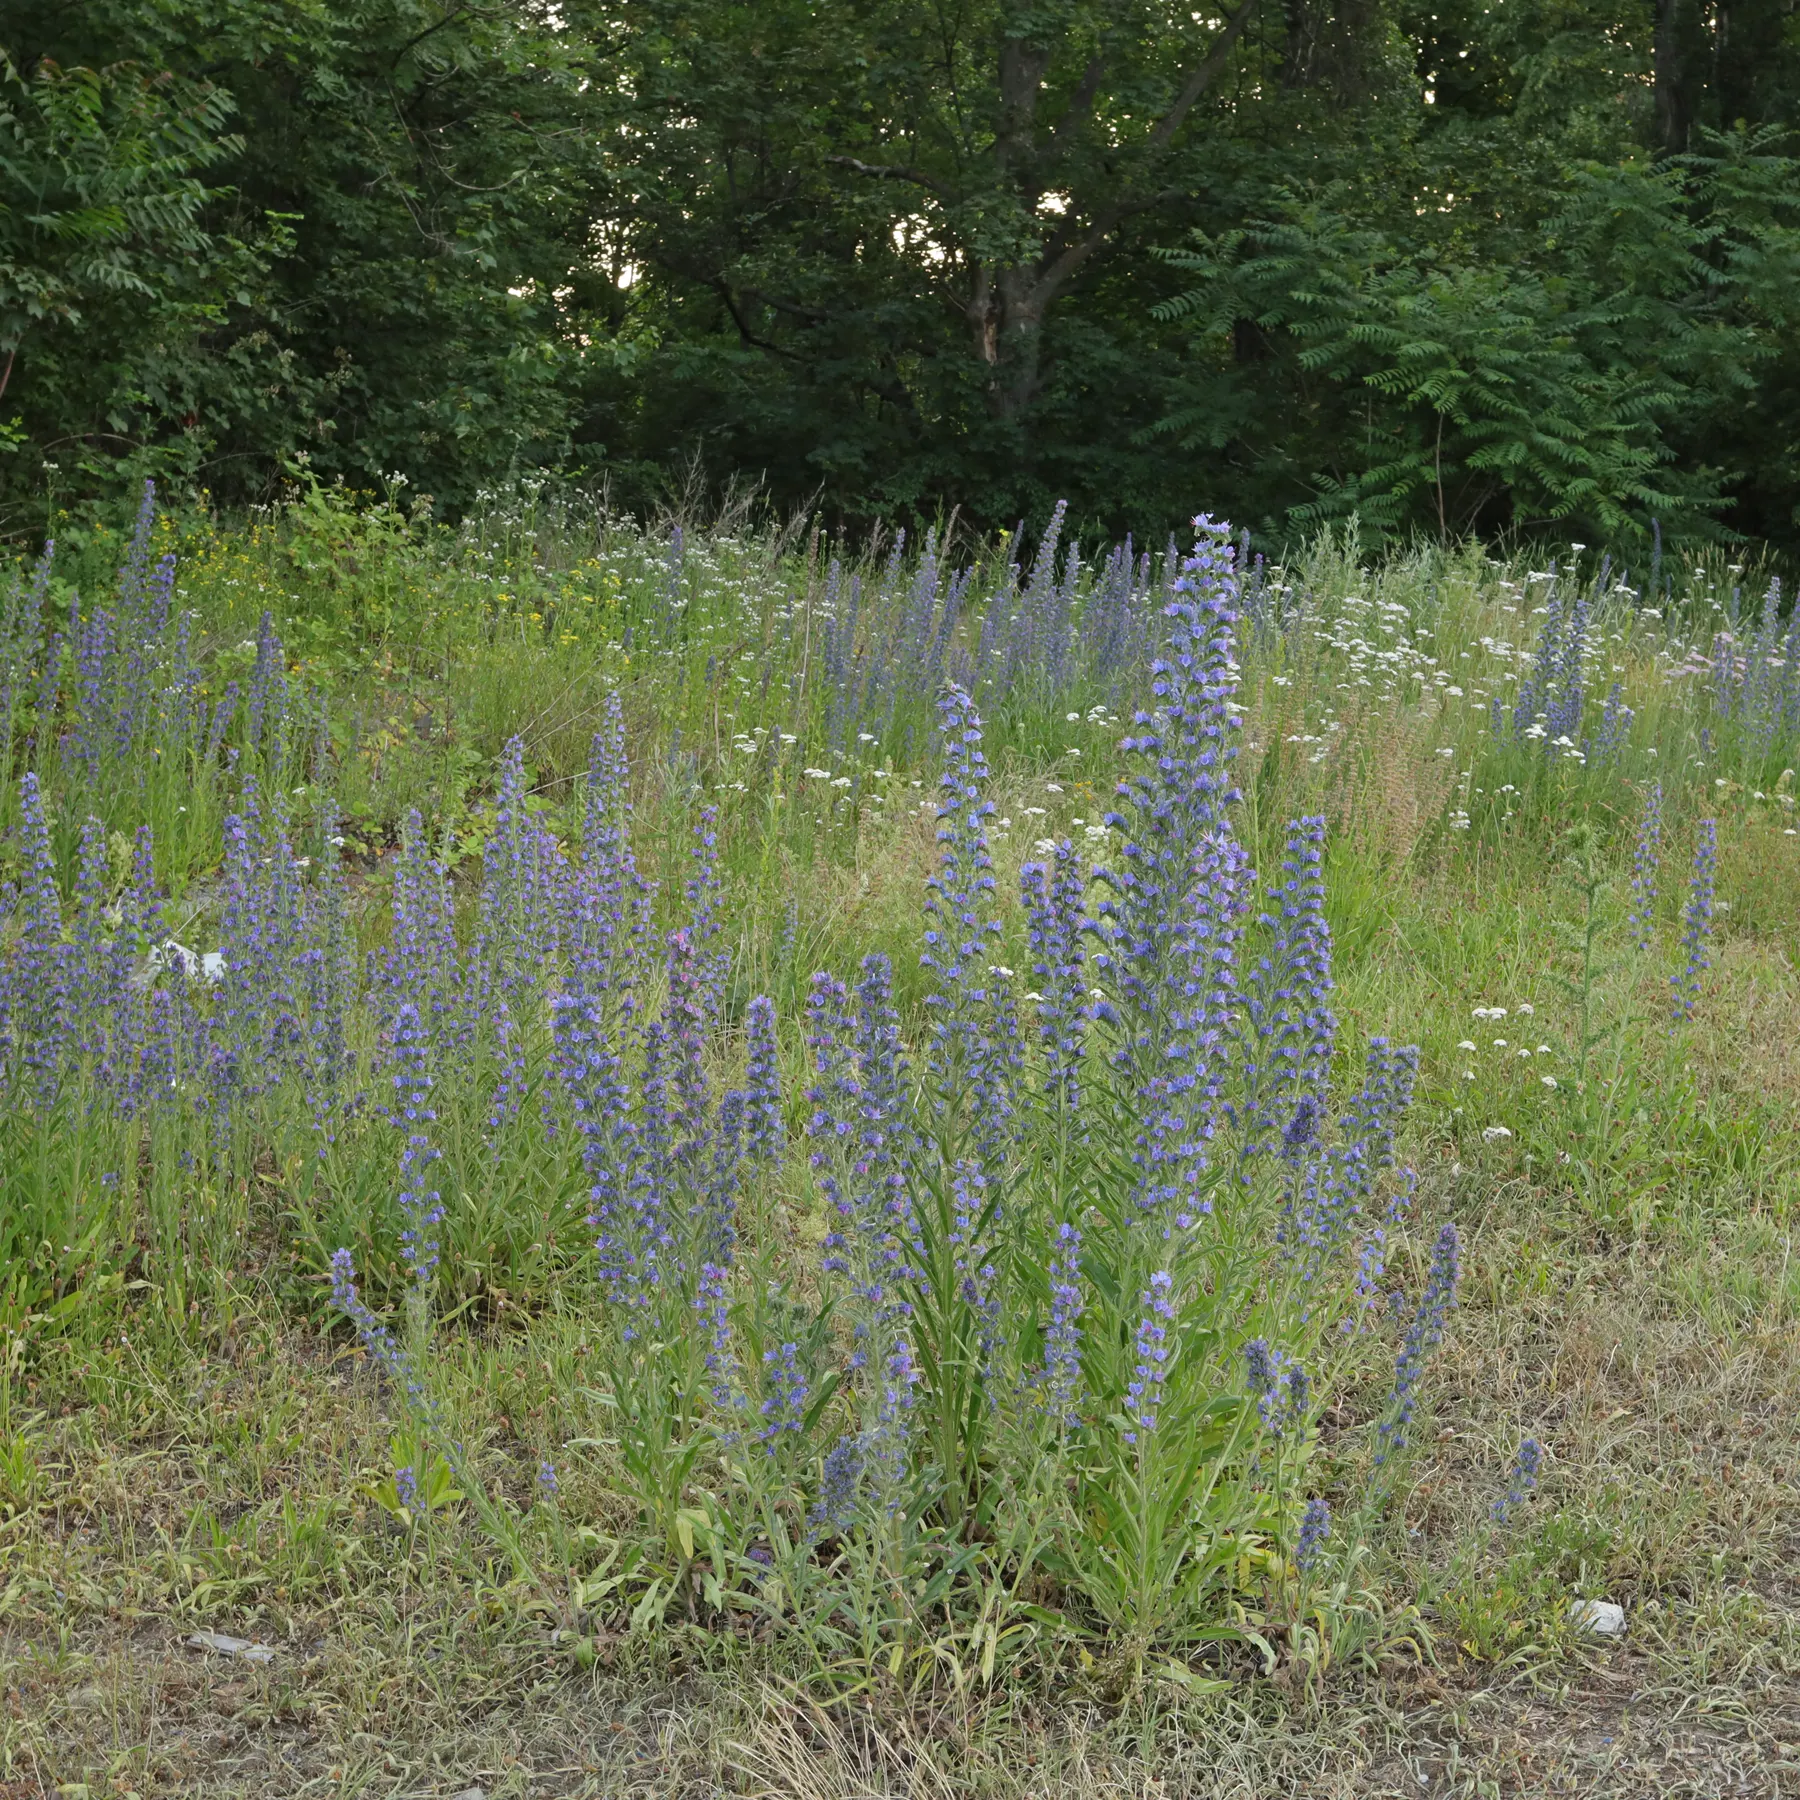 Viper's bugloss in a meadow